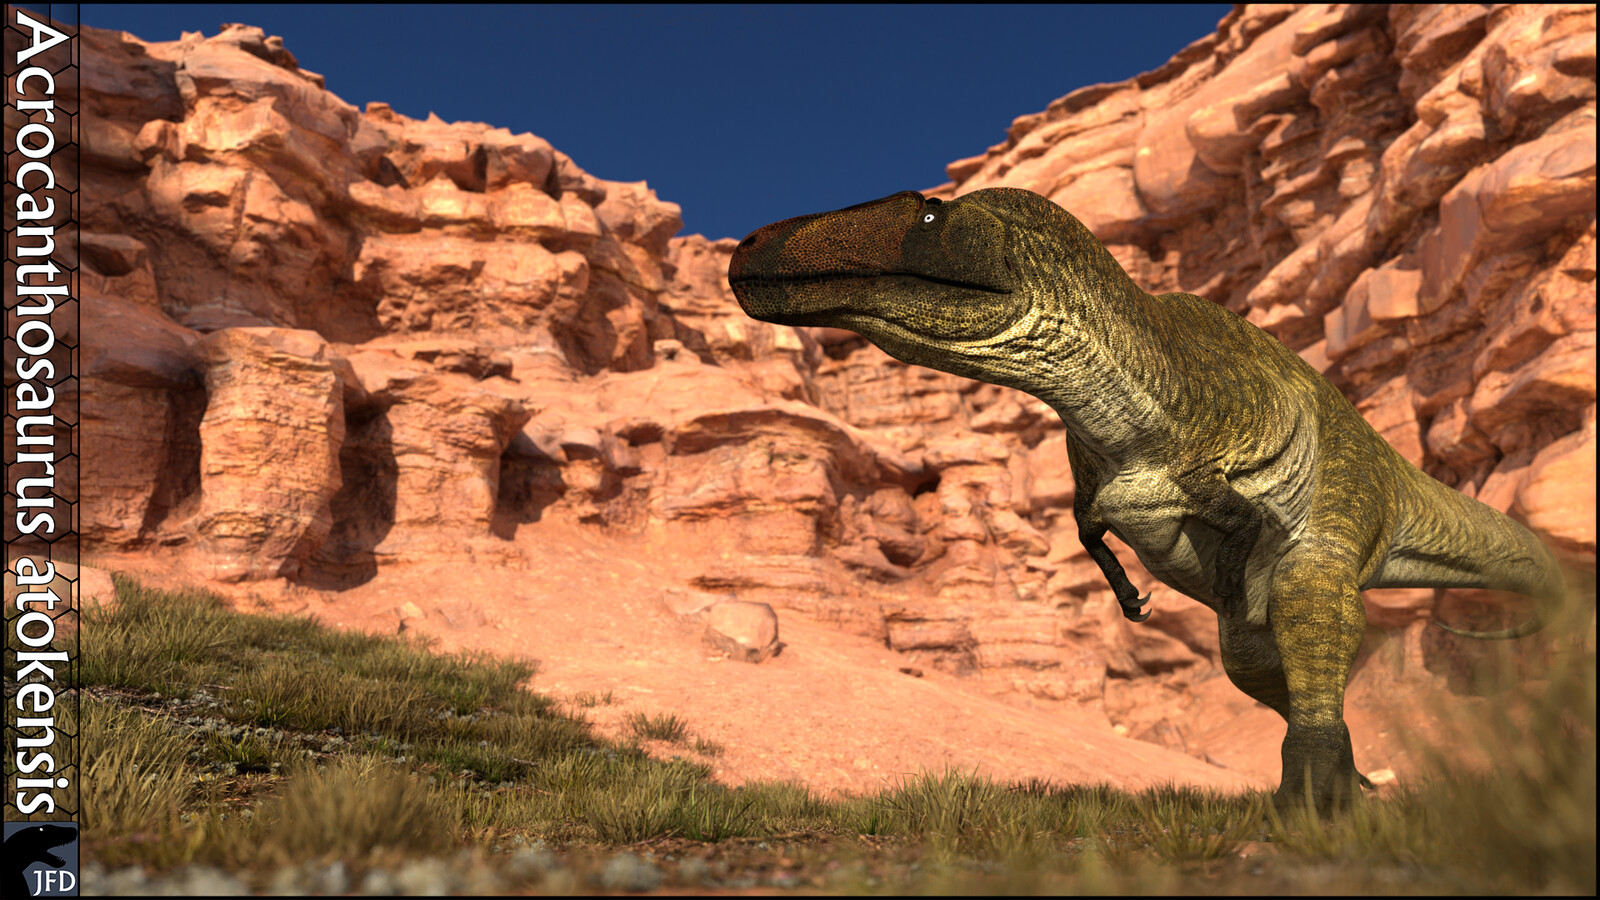 Acrocanthosaurus atokensis environment render.

Environment assets from the Scatter Blender addon.